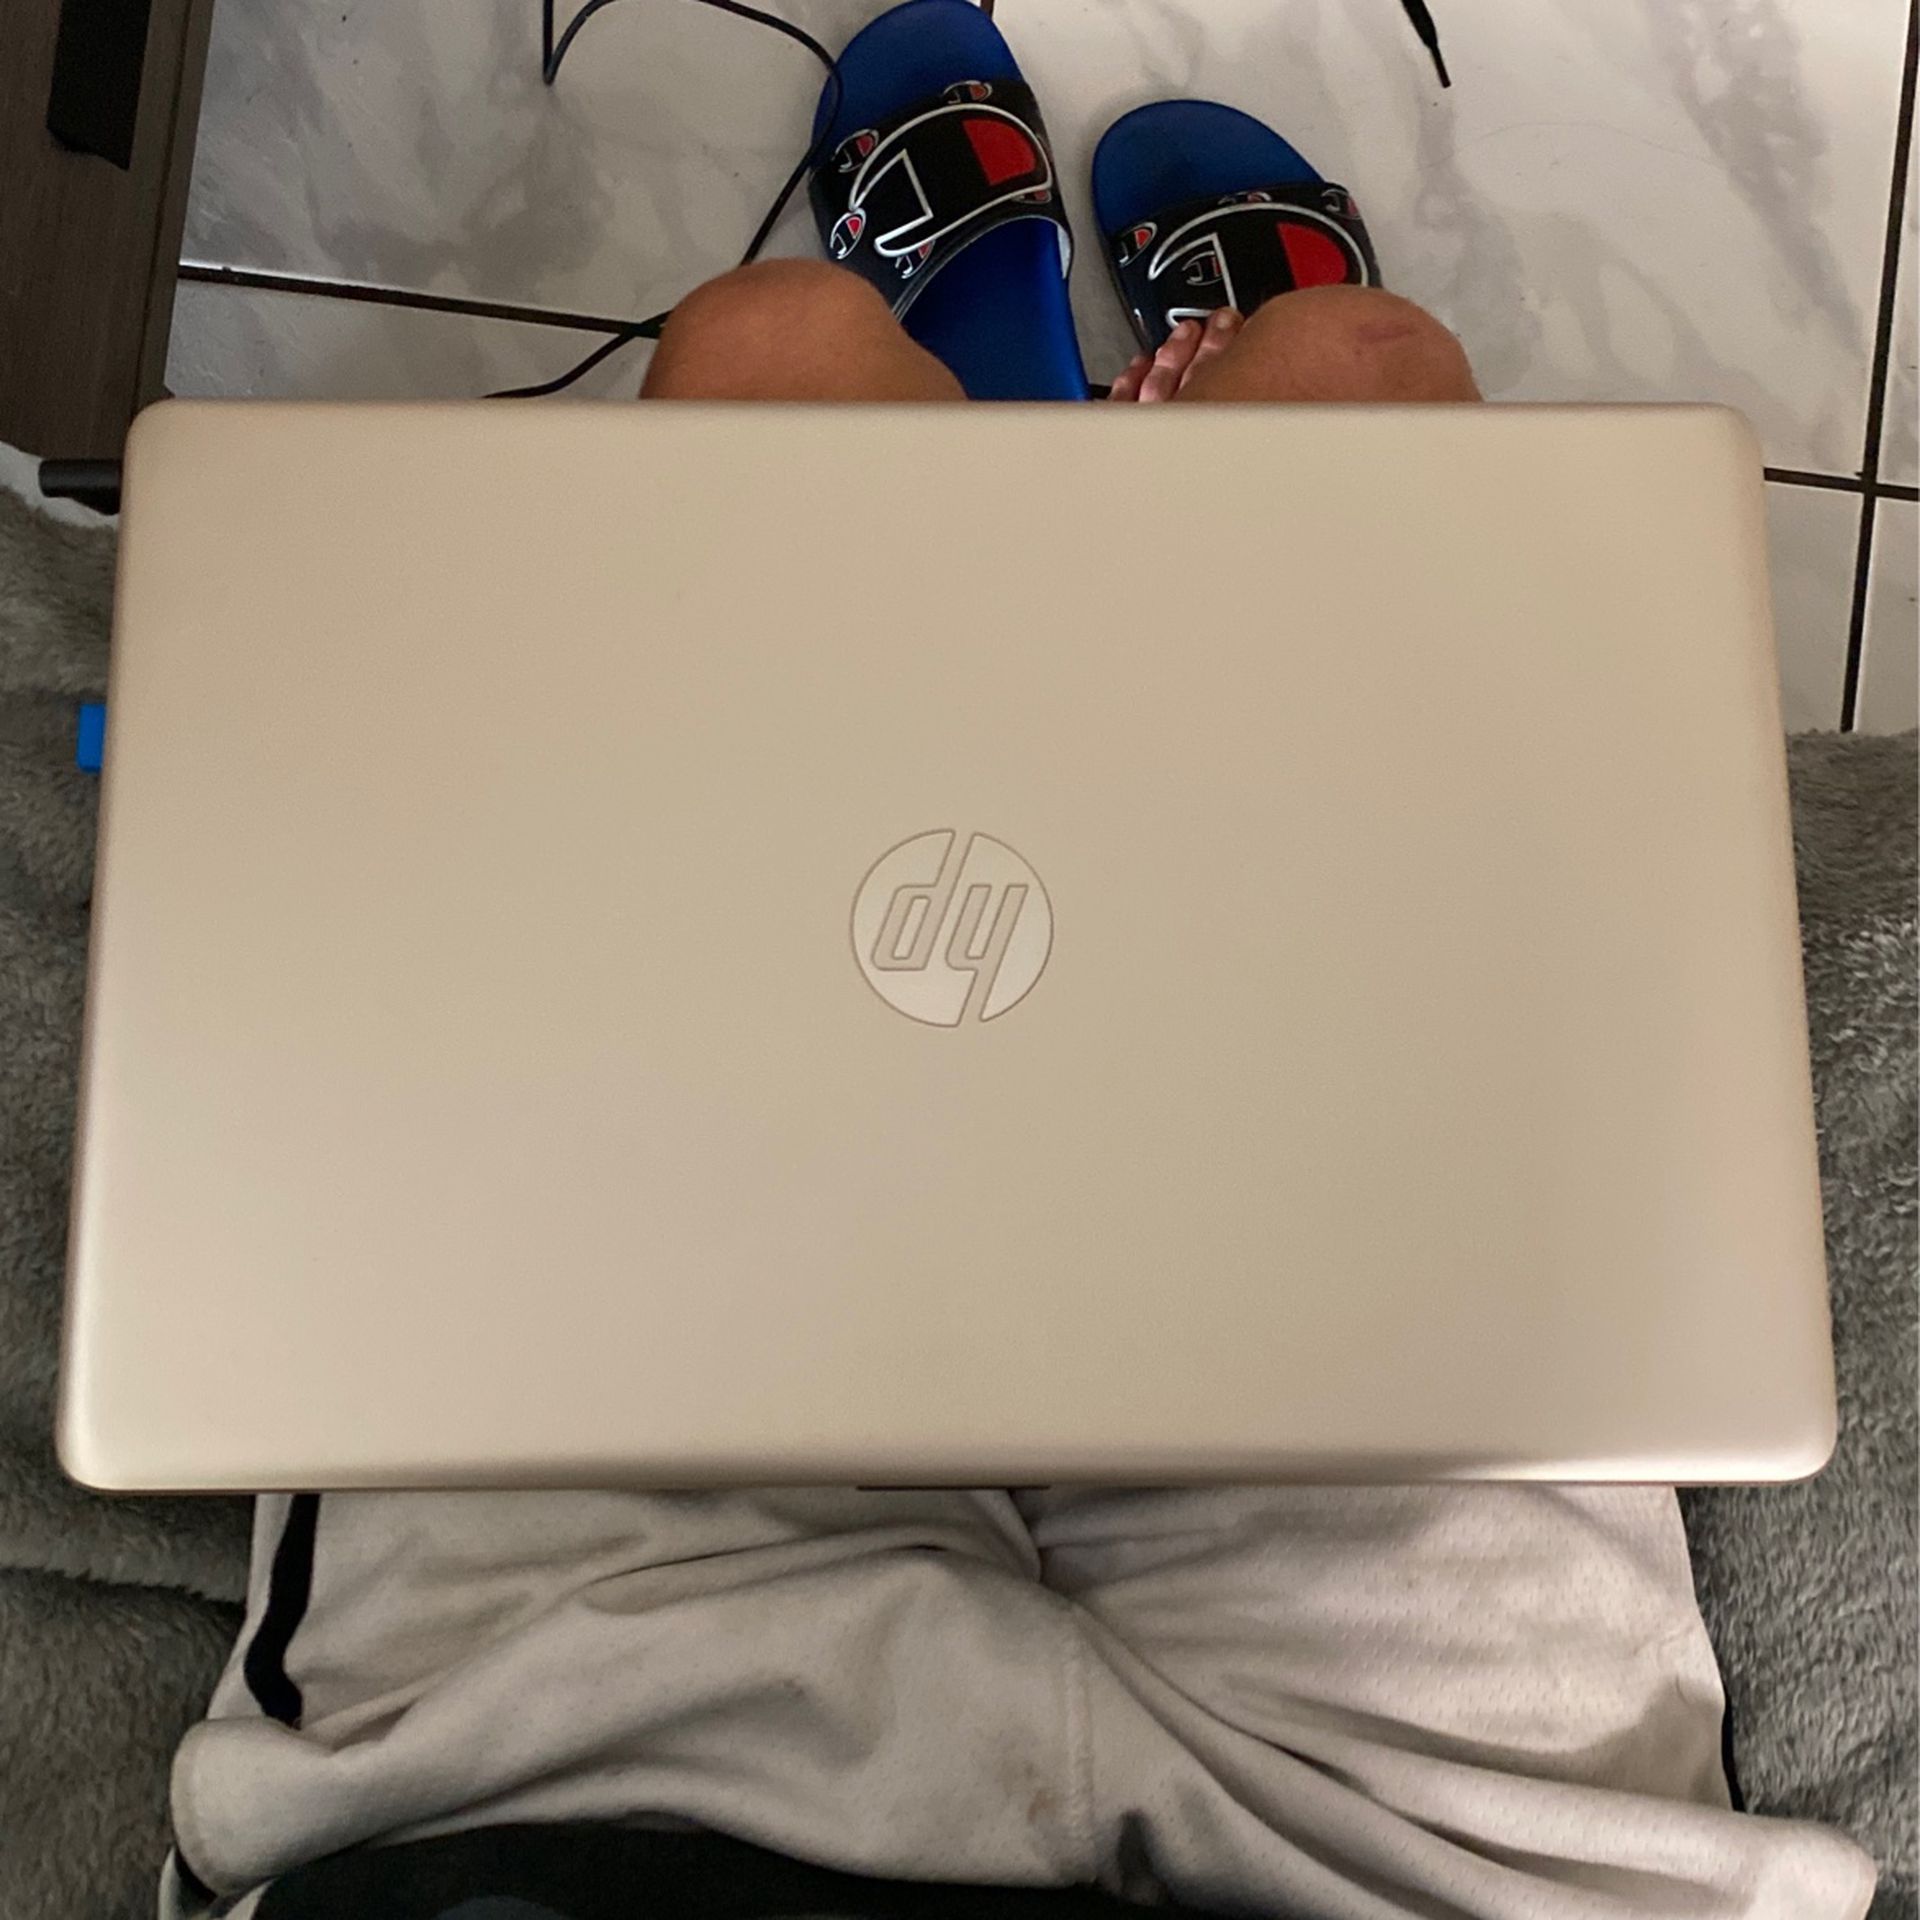 Hp Notebook Laptop 15 Inch Brand New